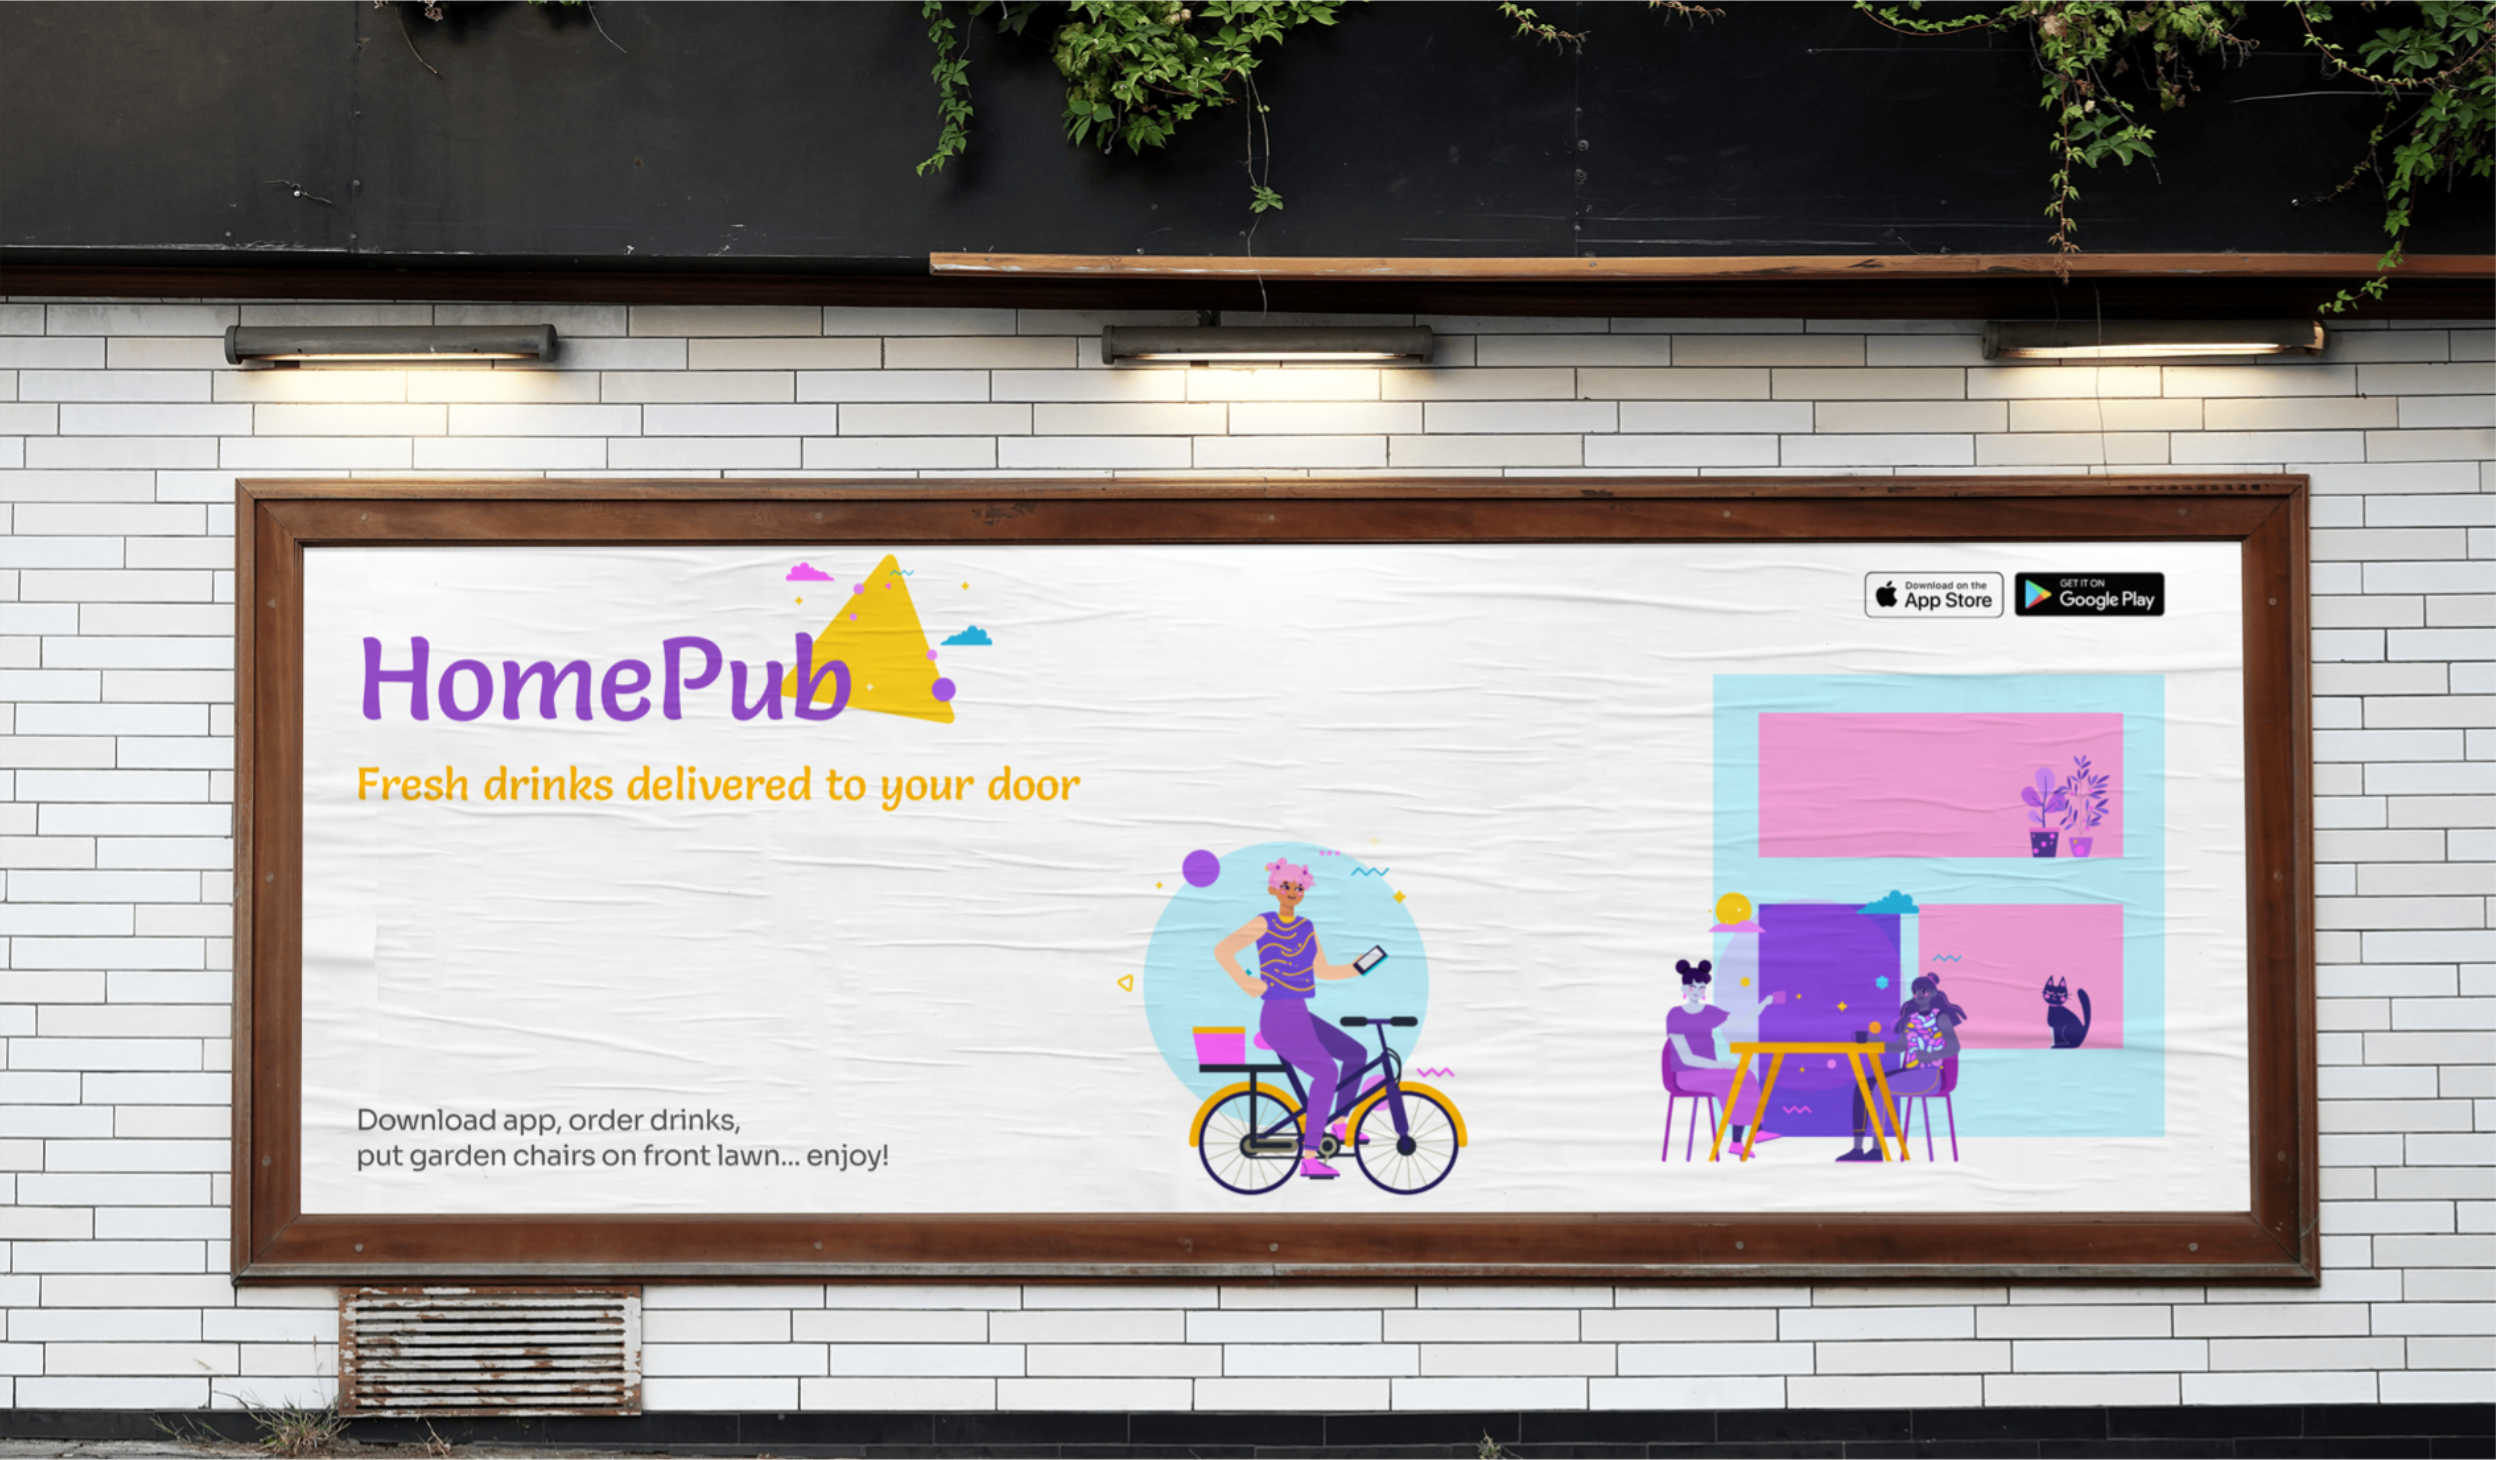 Advertorial for the homepub